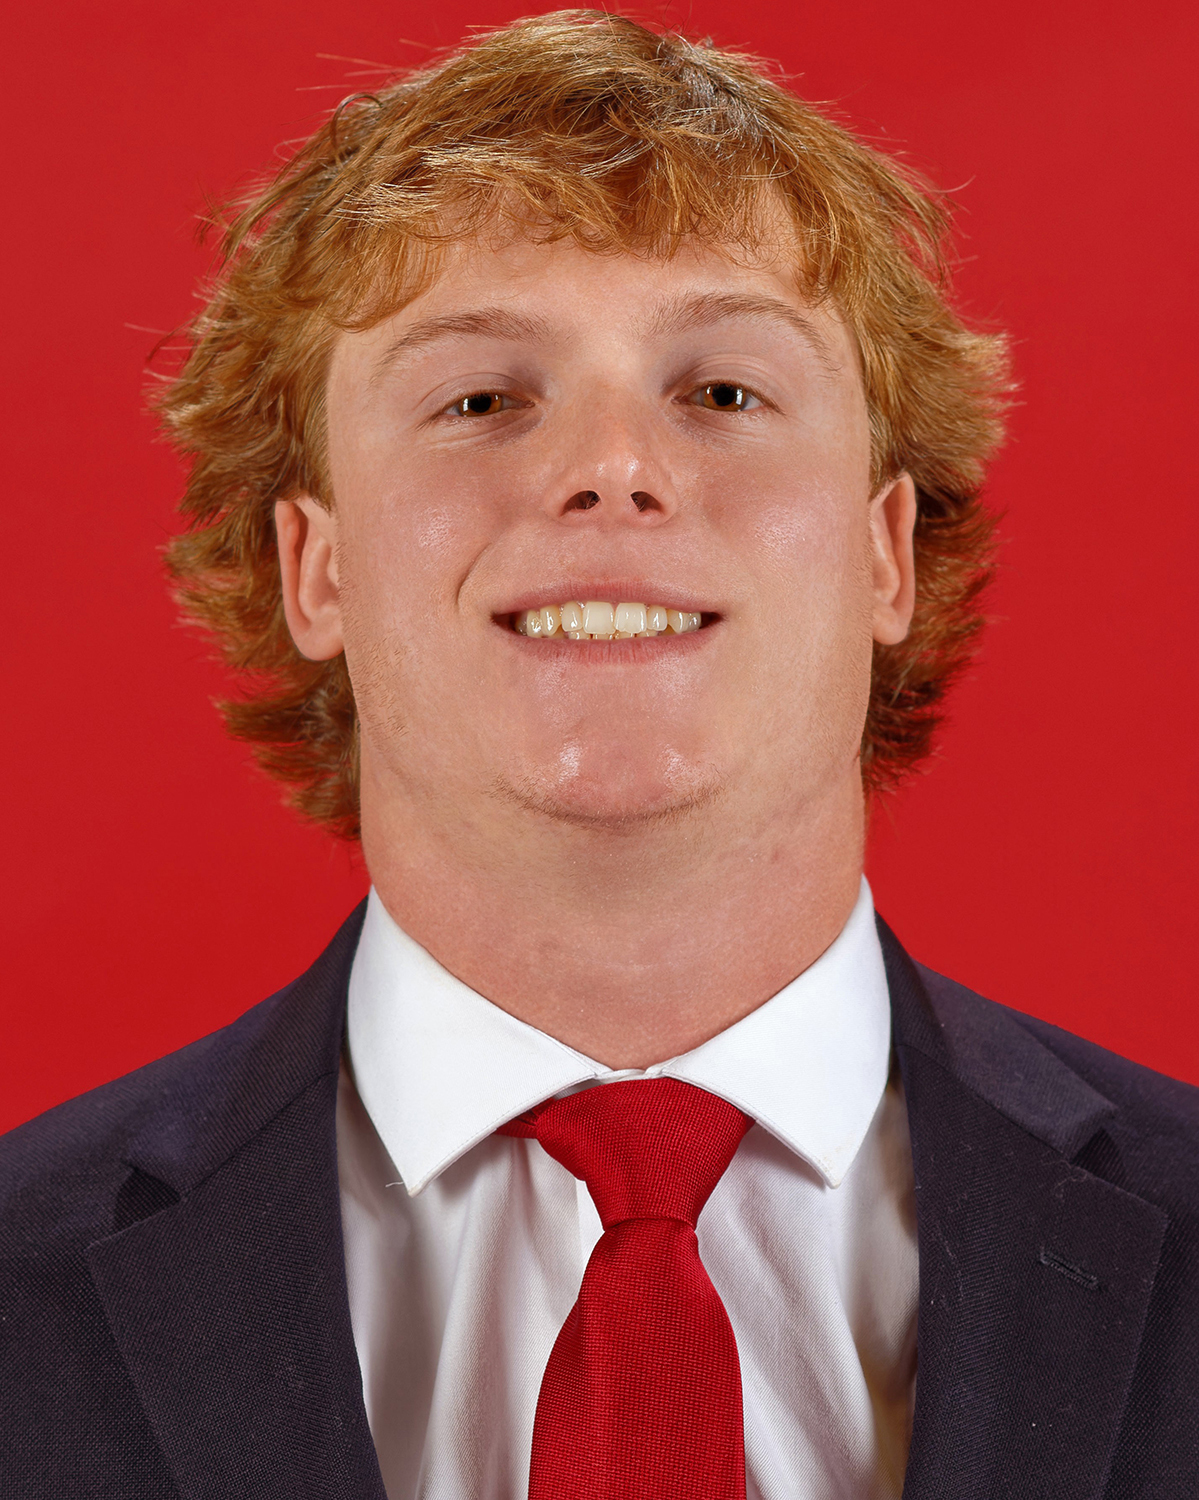 Westhampton Beach graduate Aidan Cassara was a member of the University of Tampa men's lacrosse team that captured the school's first NCAA Division II National Championship last month. TODD MONTGOMERY